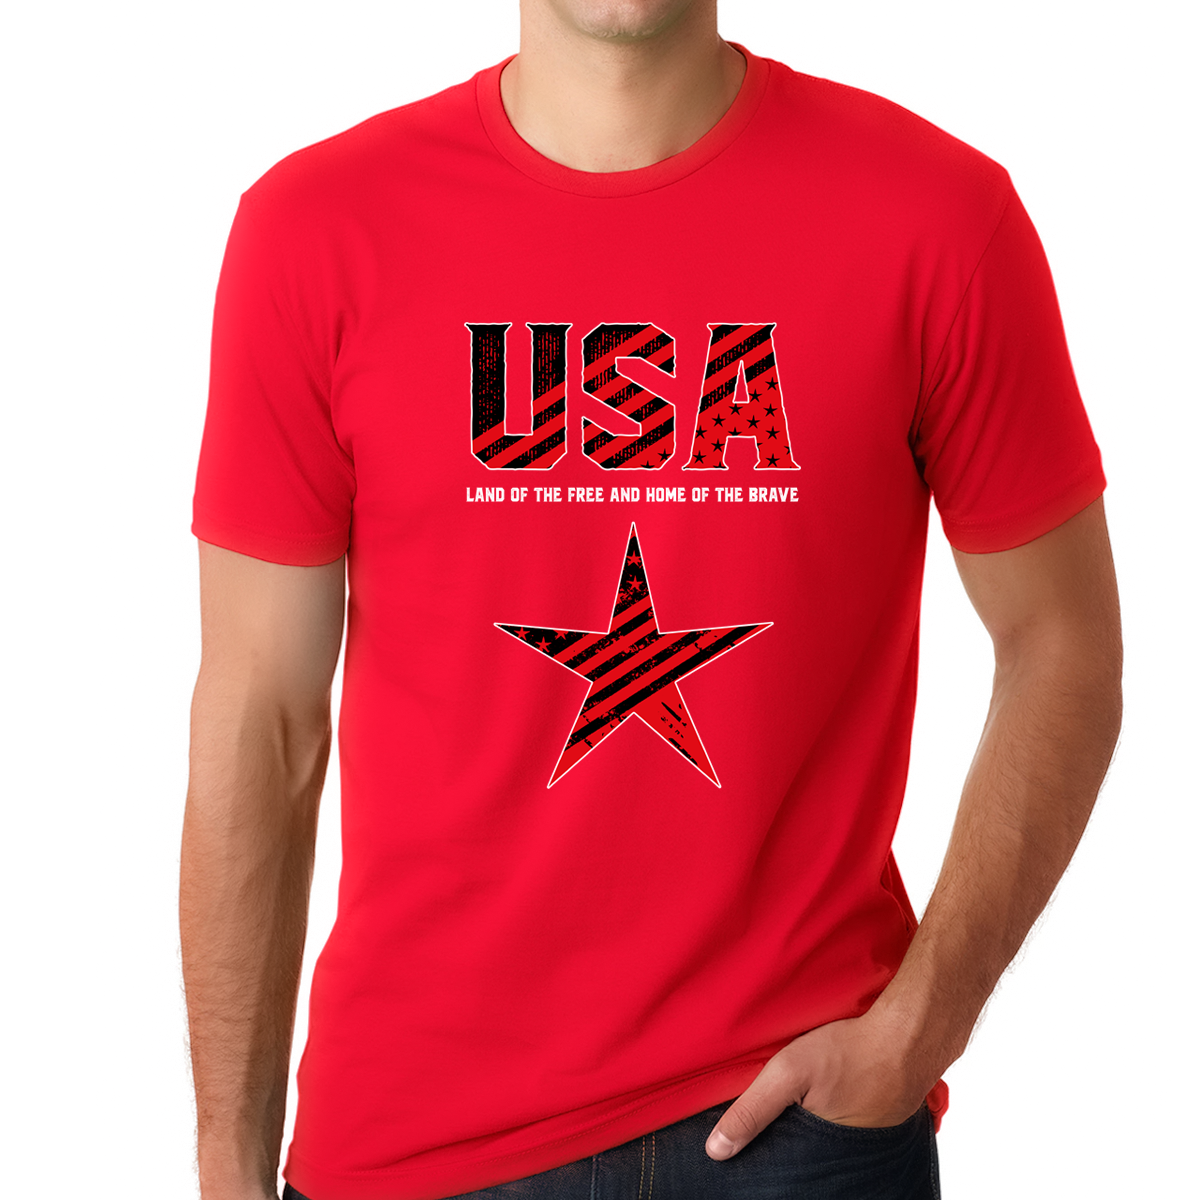 4th of July Shirts for Men - 4th of July Shirts - Patriotic Shirts for Men - 4th of July Shirt - Fire Fit Designs